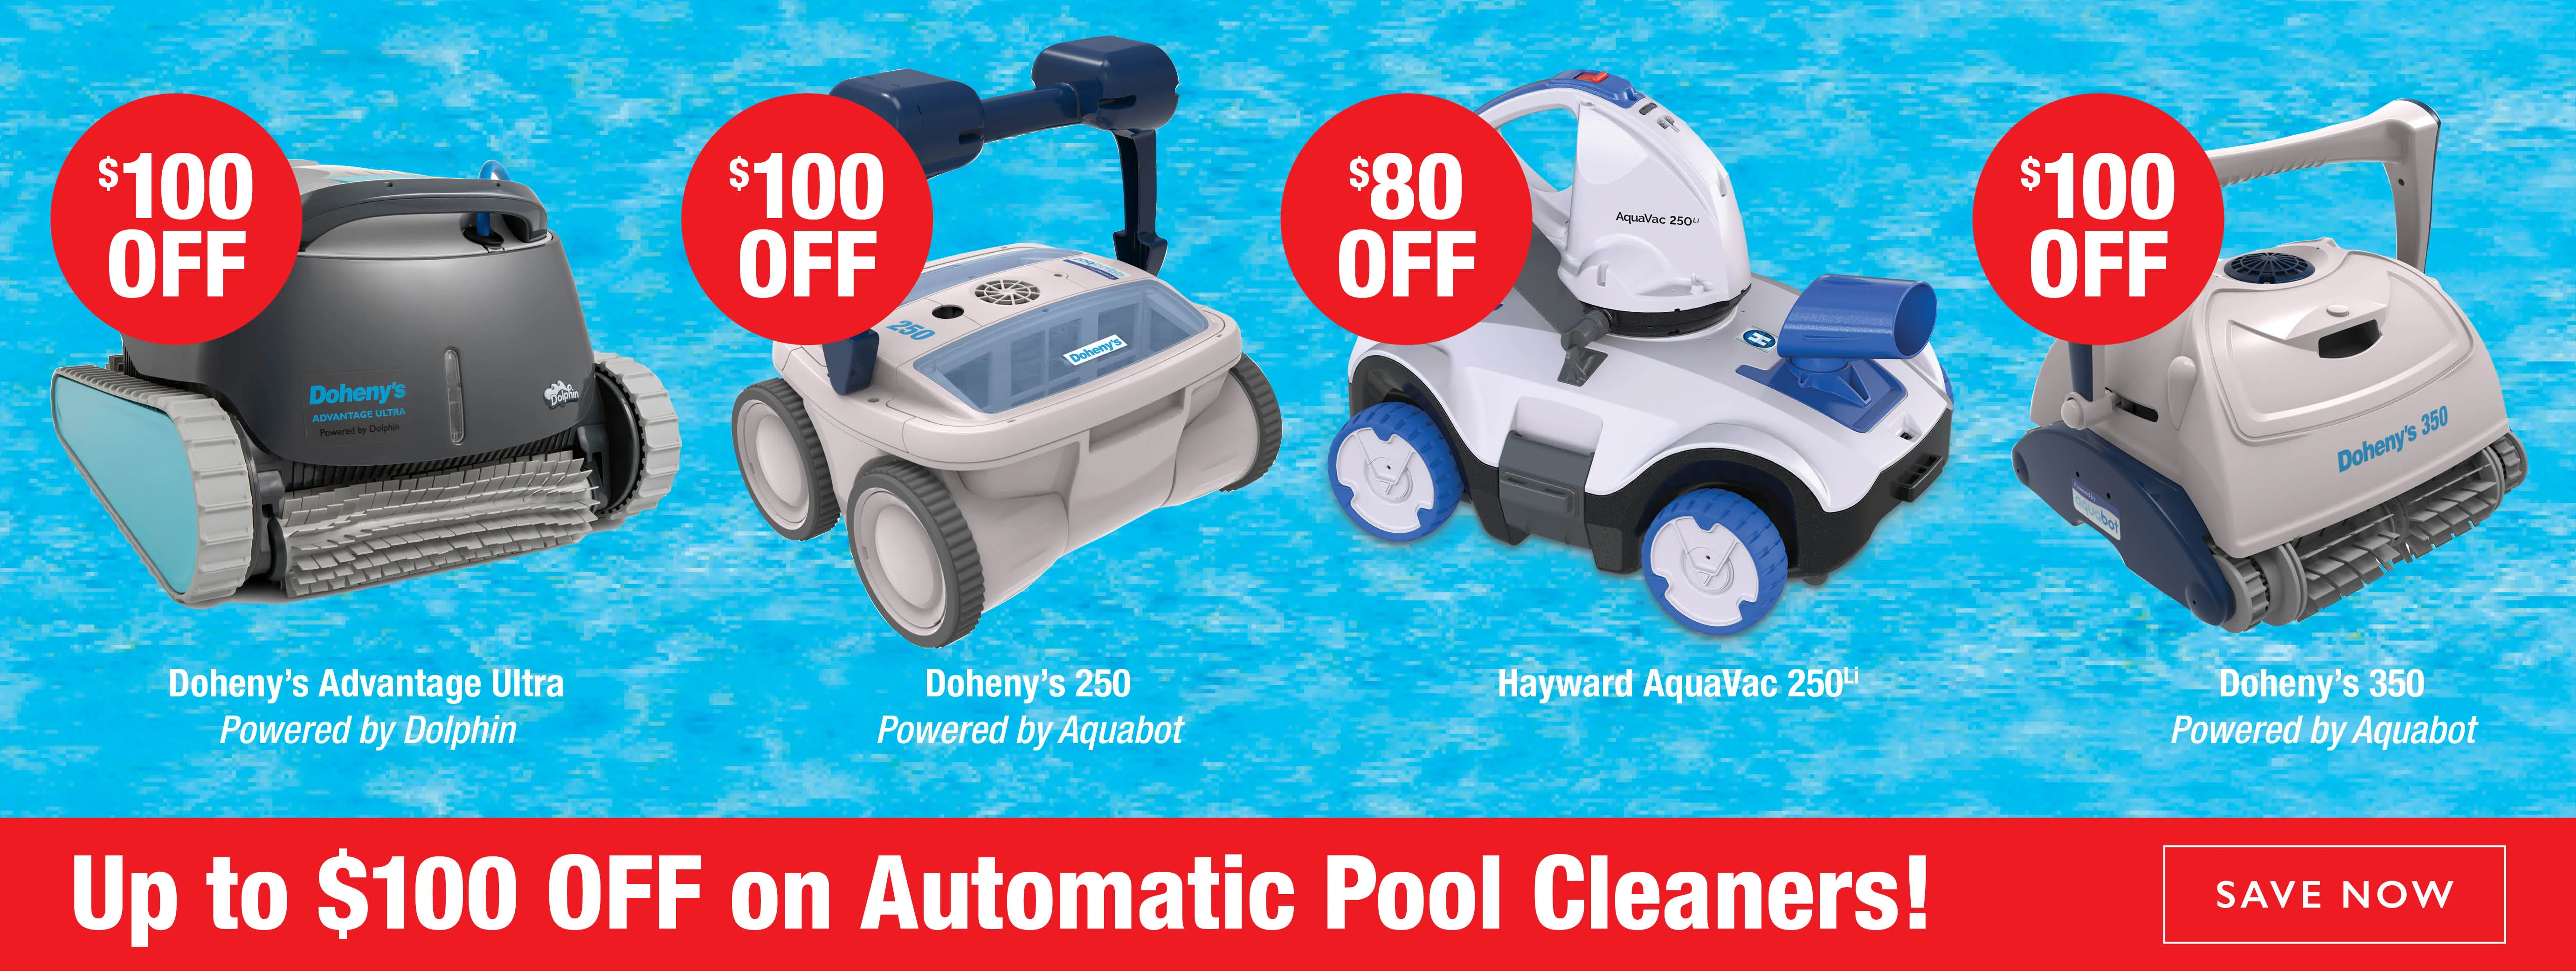 Up to $100 OFF Automatic Pool Cleaners